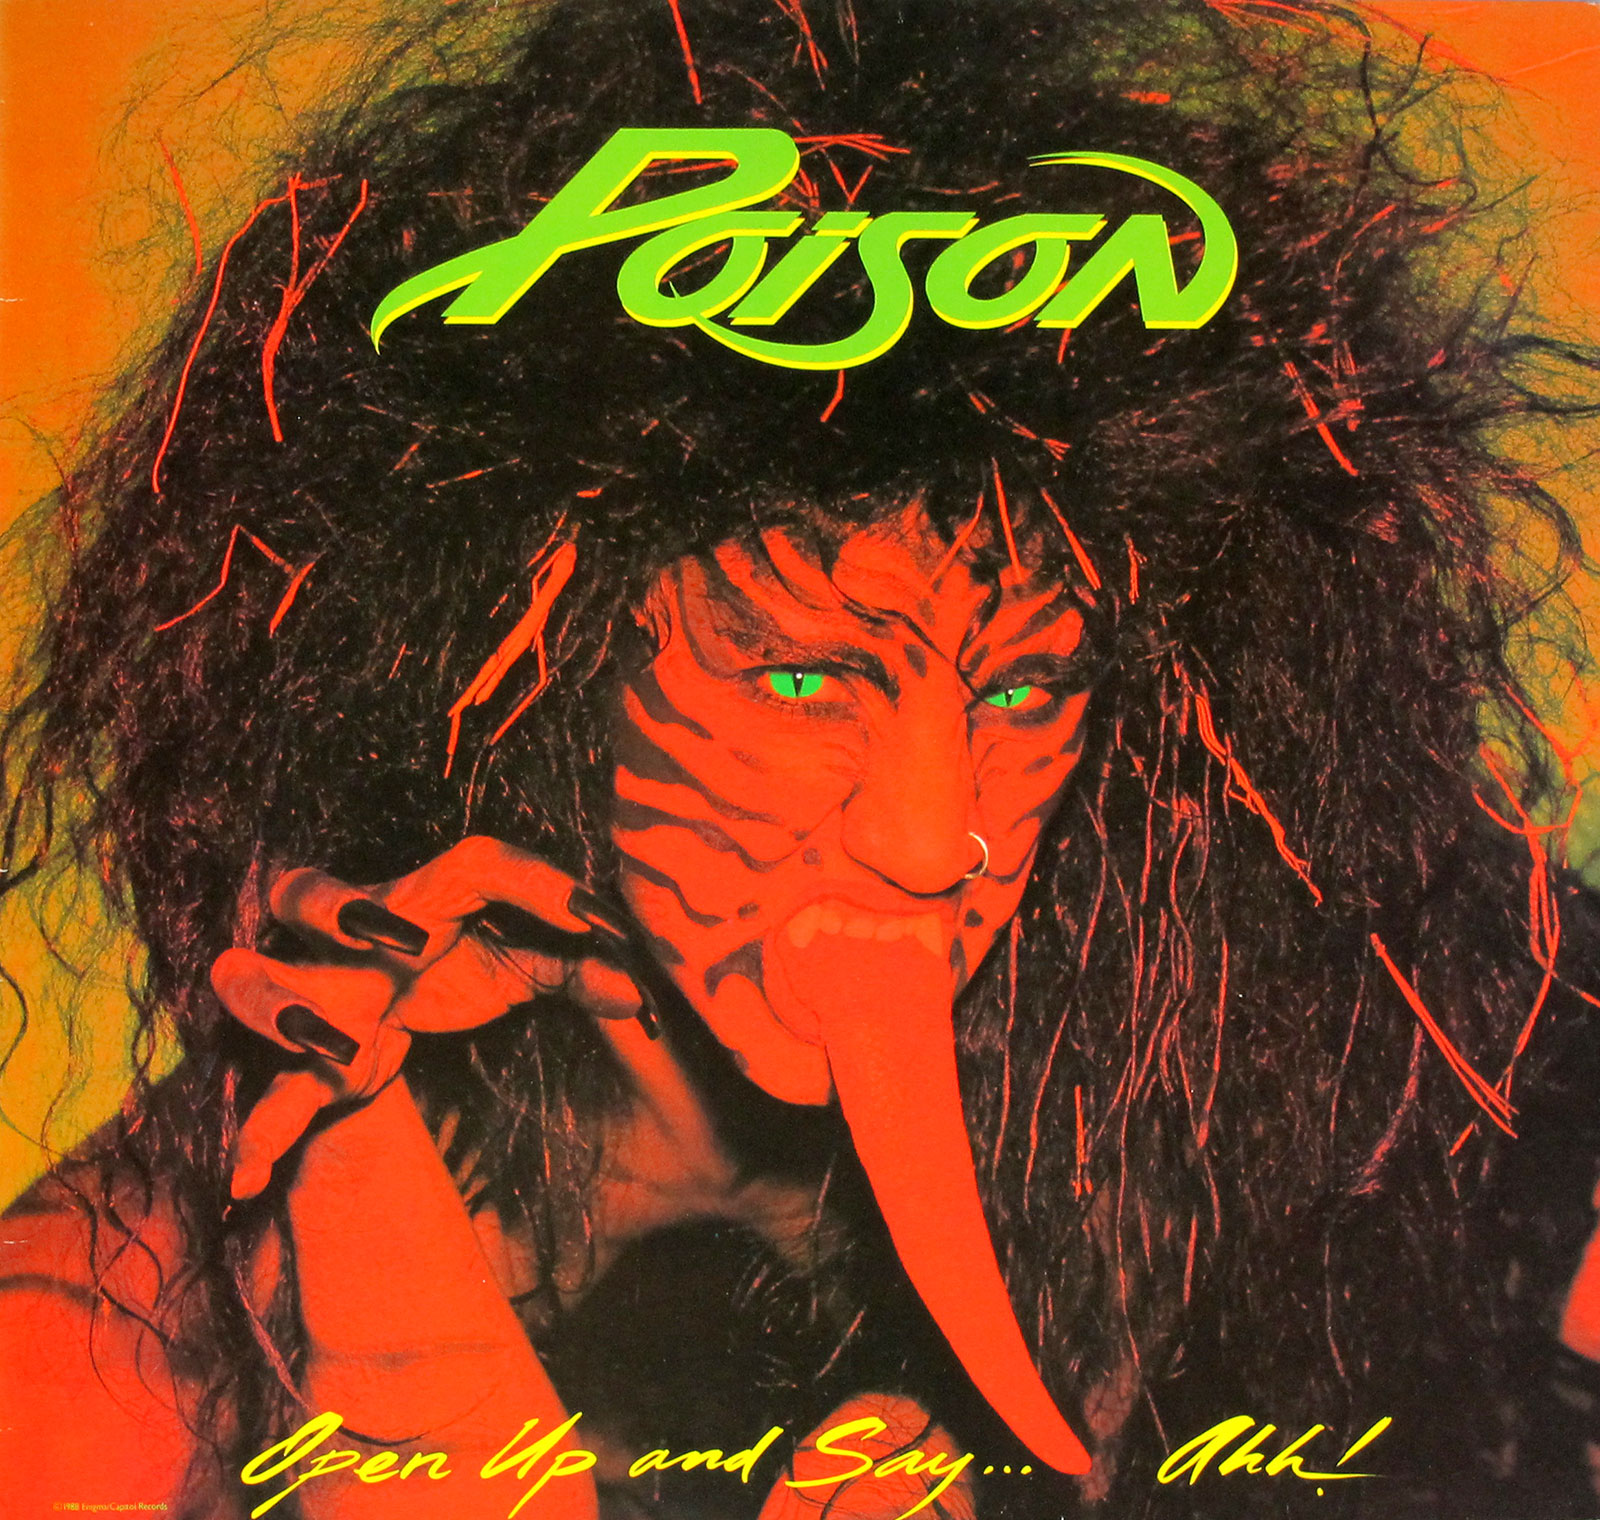 POISON Open Up And Say Ah album was banned retailers objected to this  sleeve on the grounds that it was too raunchy. Vinyl Album Gallery  #vinylrecords